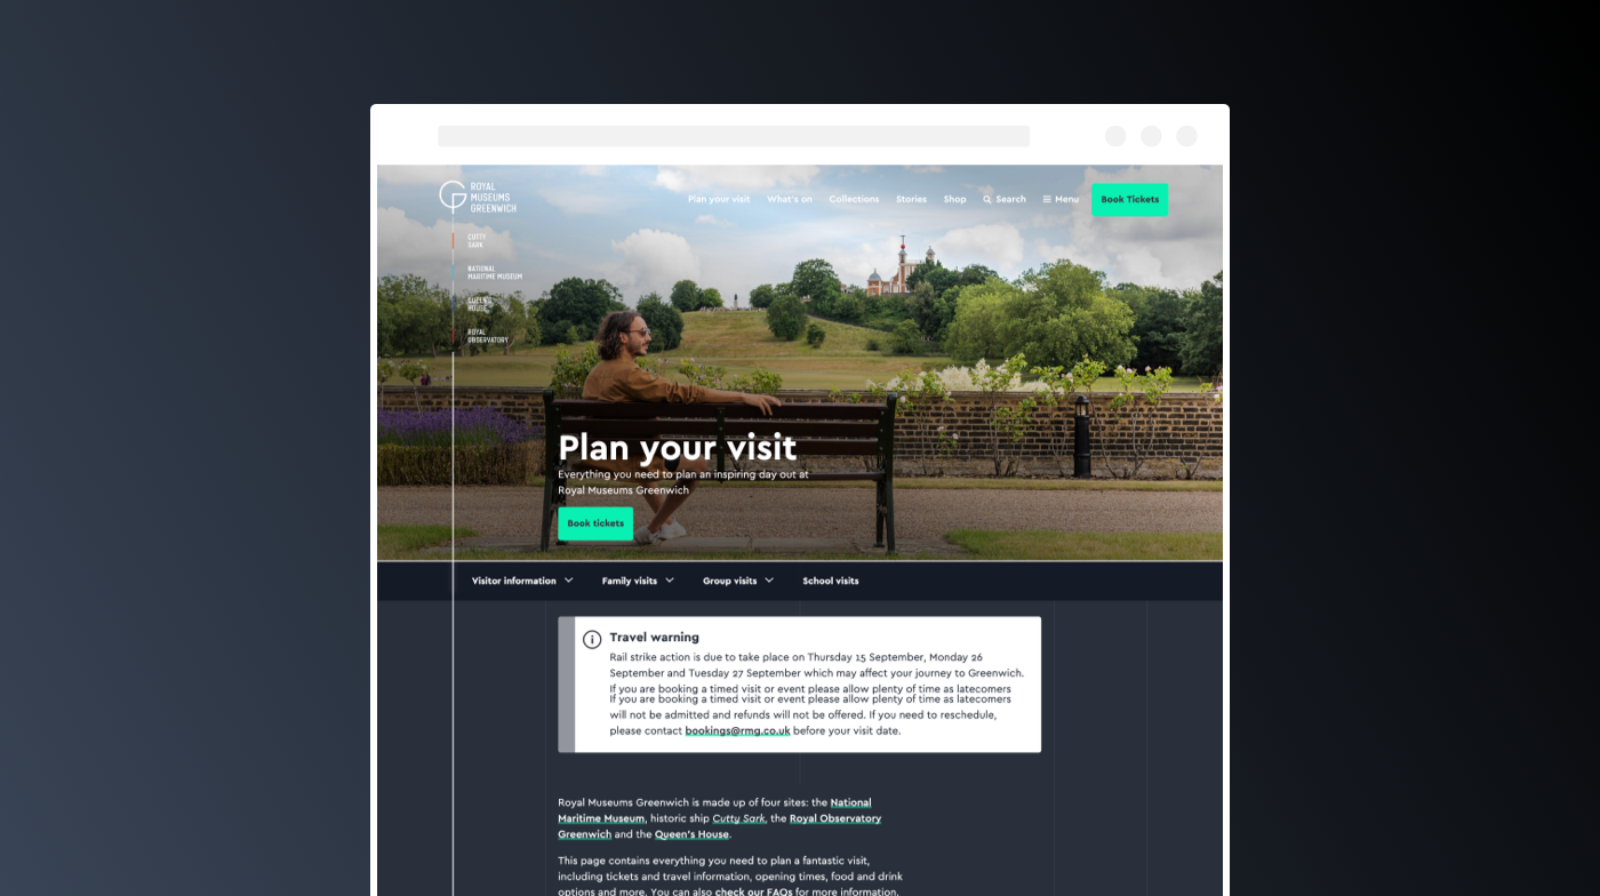 The plan your visit landing page for the Royal Museums at Greenwich